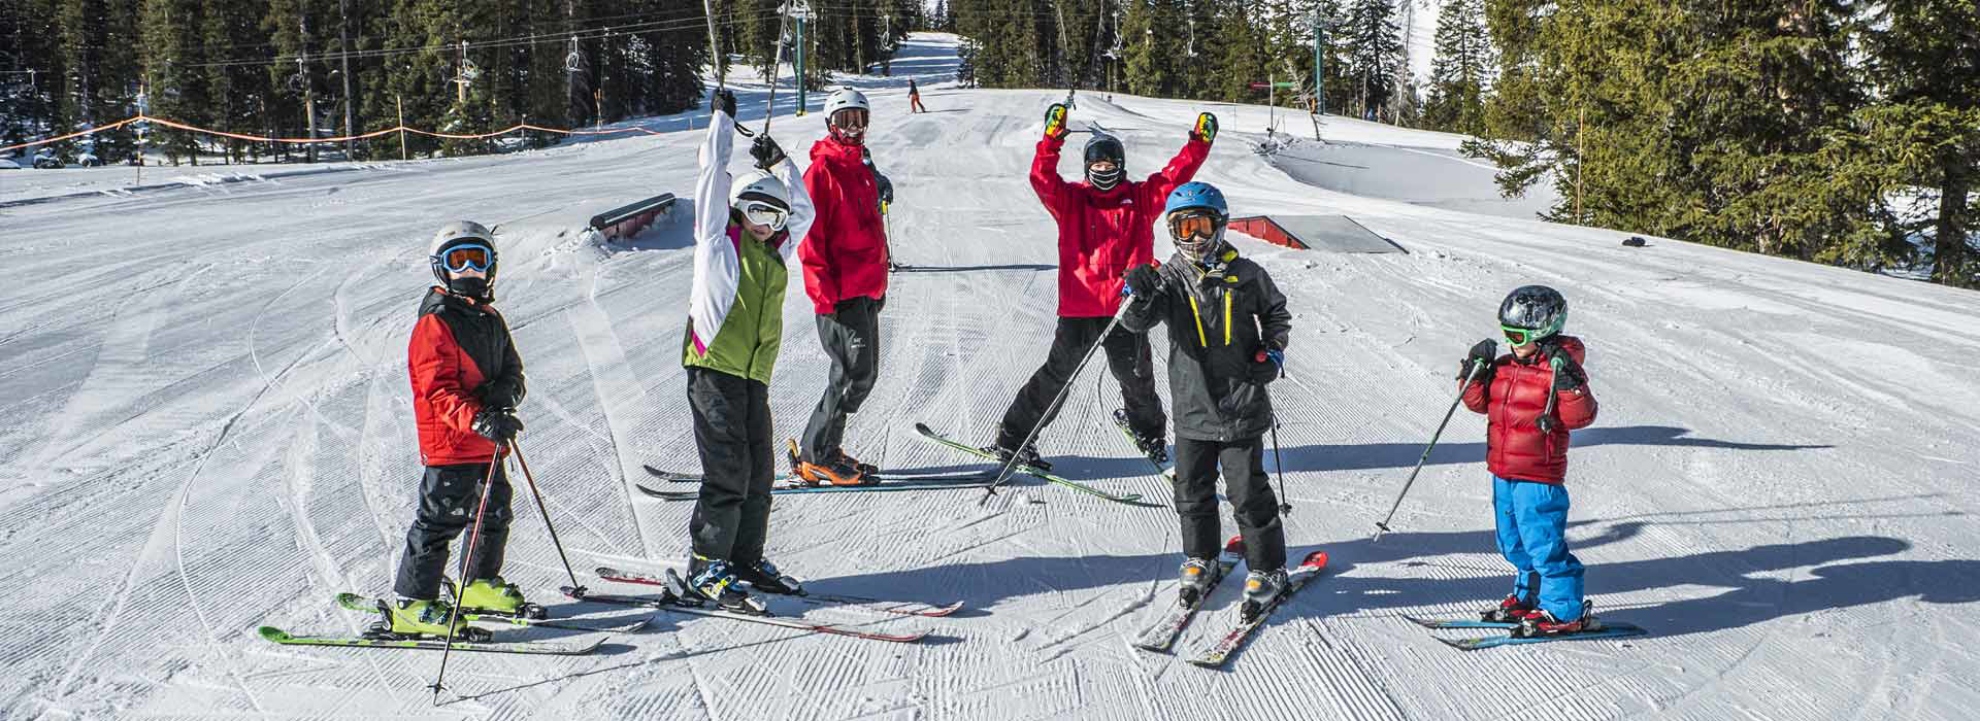 A Brighton Resort instructor teaching pre-teens how to ride. 